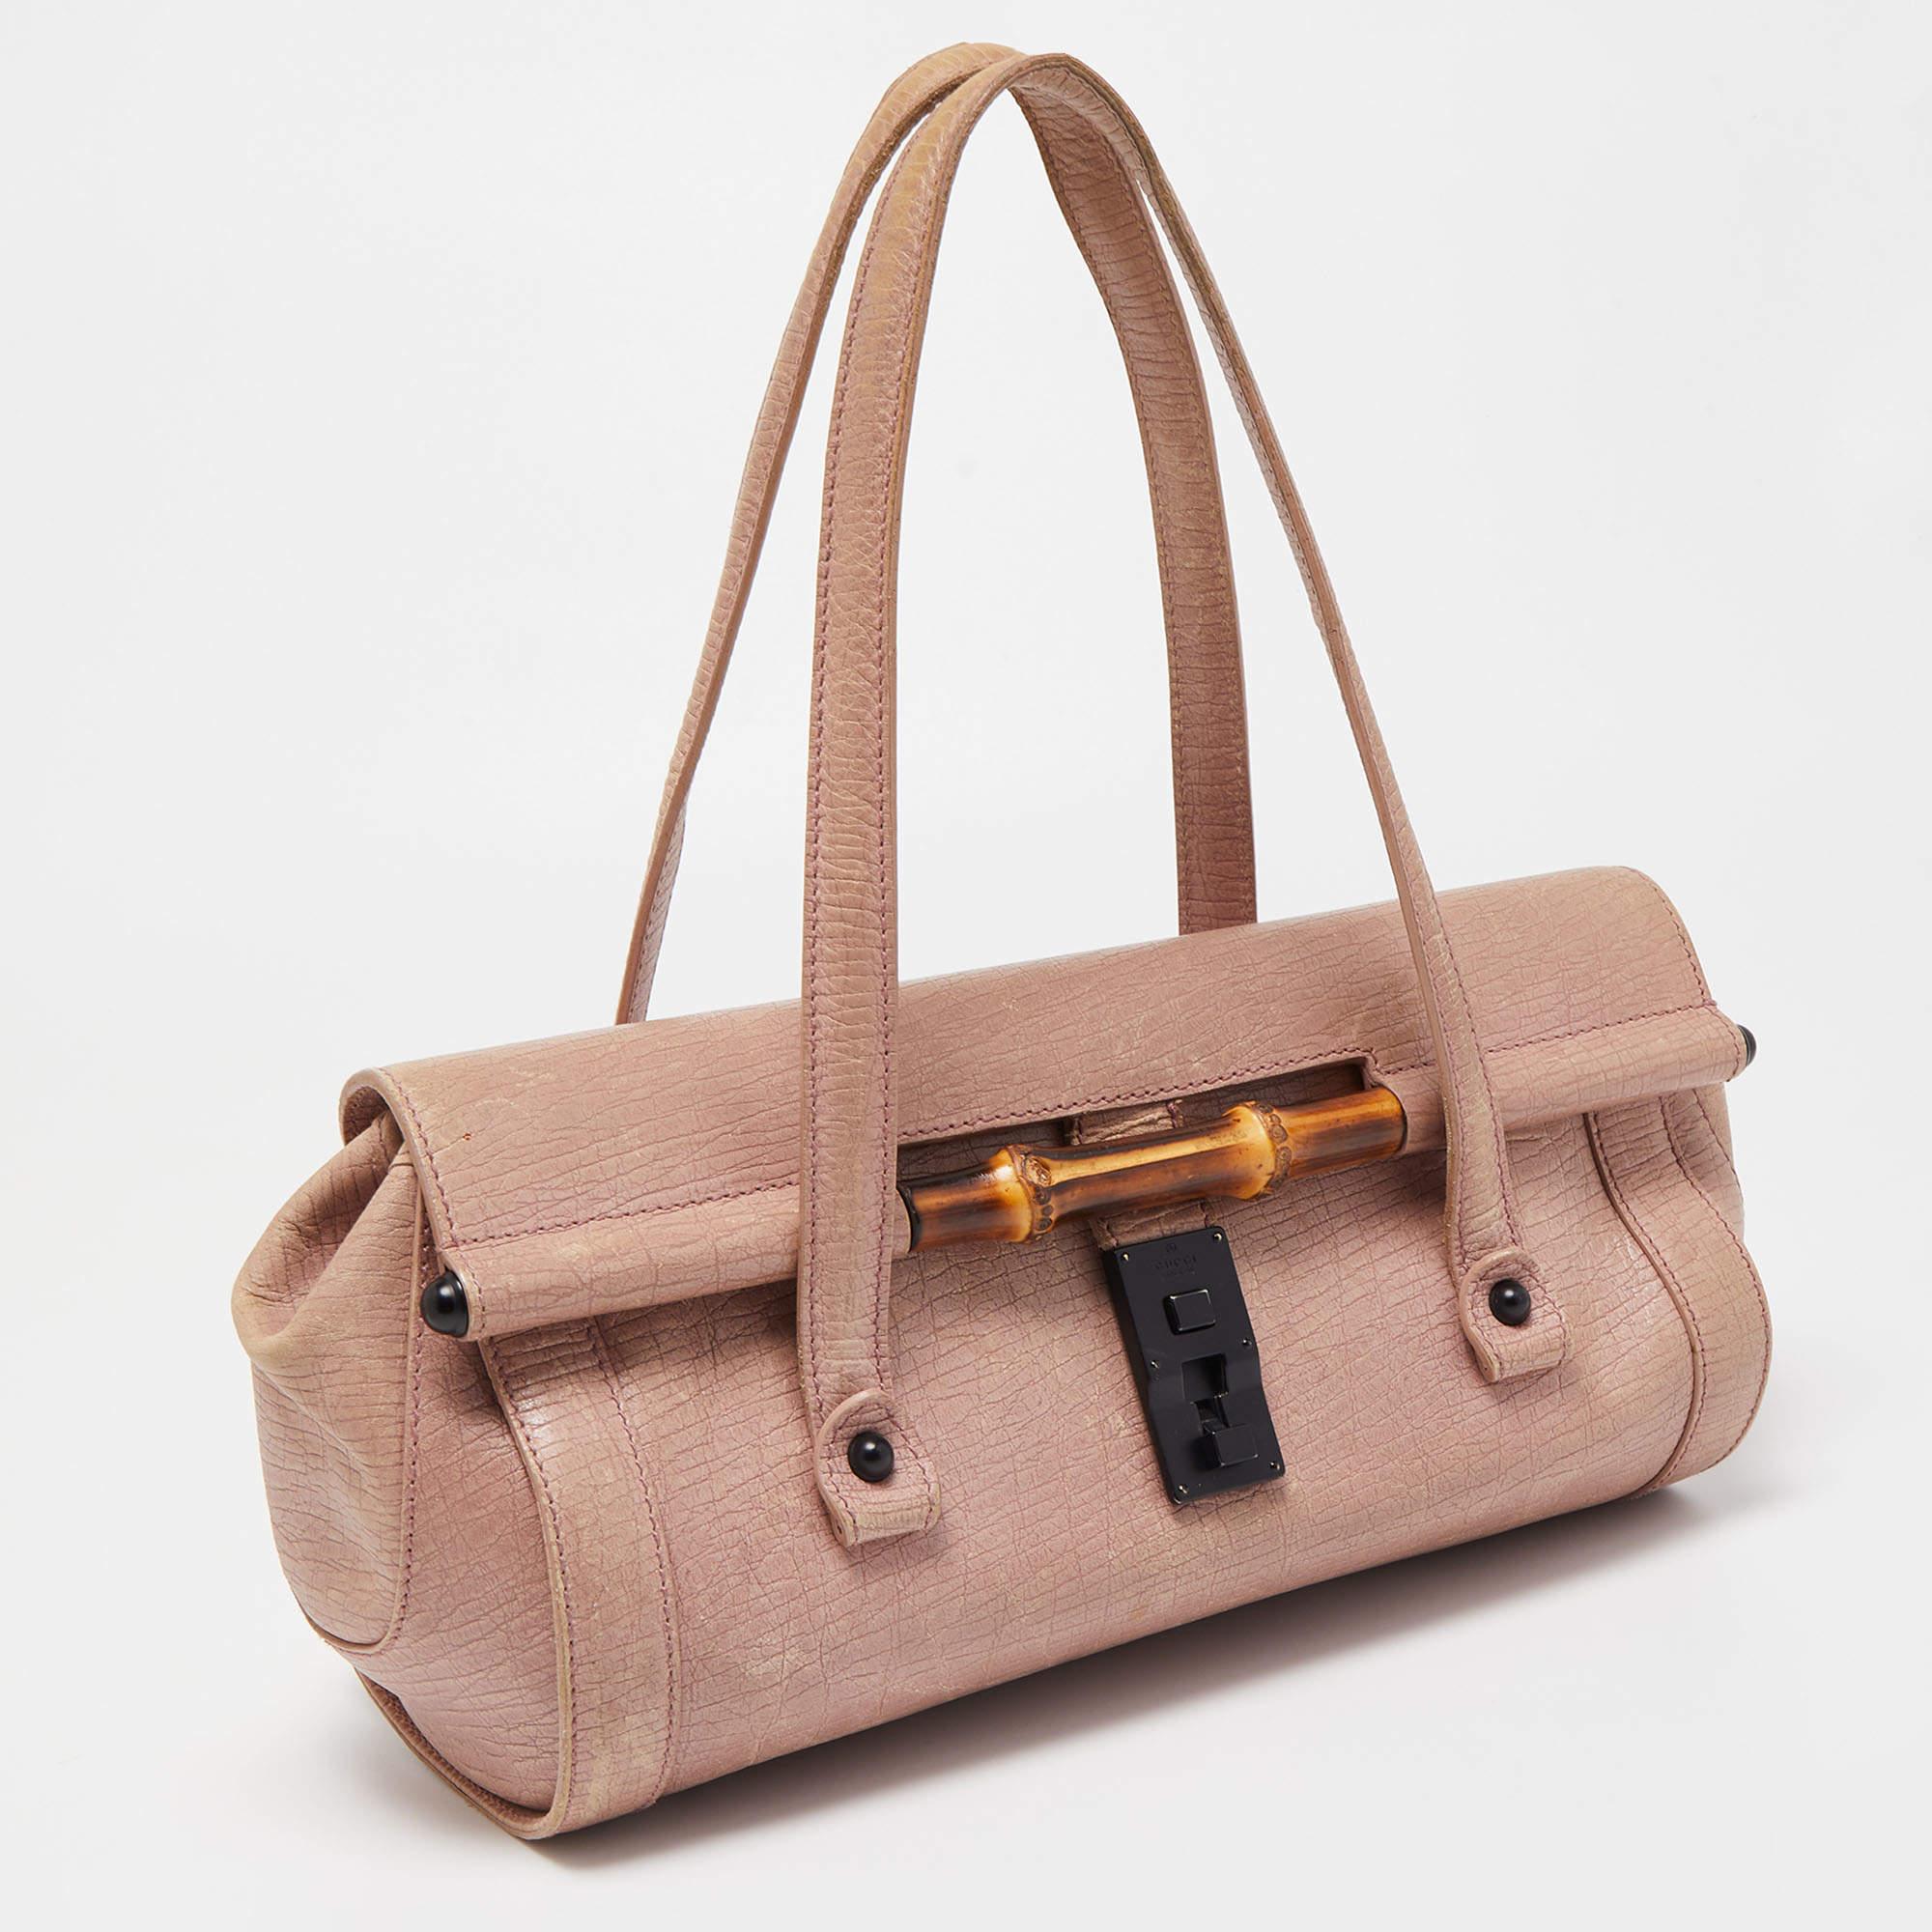 Stylish and easy to carry, this designer satchel will be a fine choice for work or after. Lined well, this pre-loved bag for women can easily fit all your essentials. It can be held in your arm or hand.

